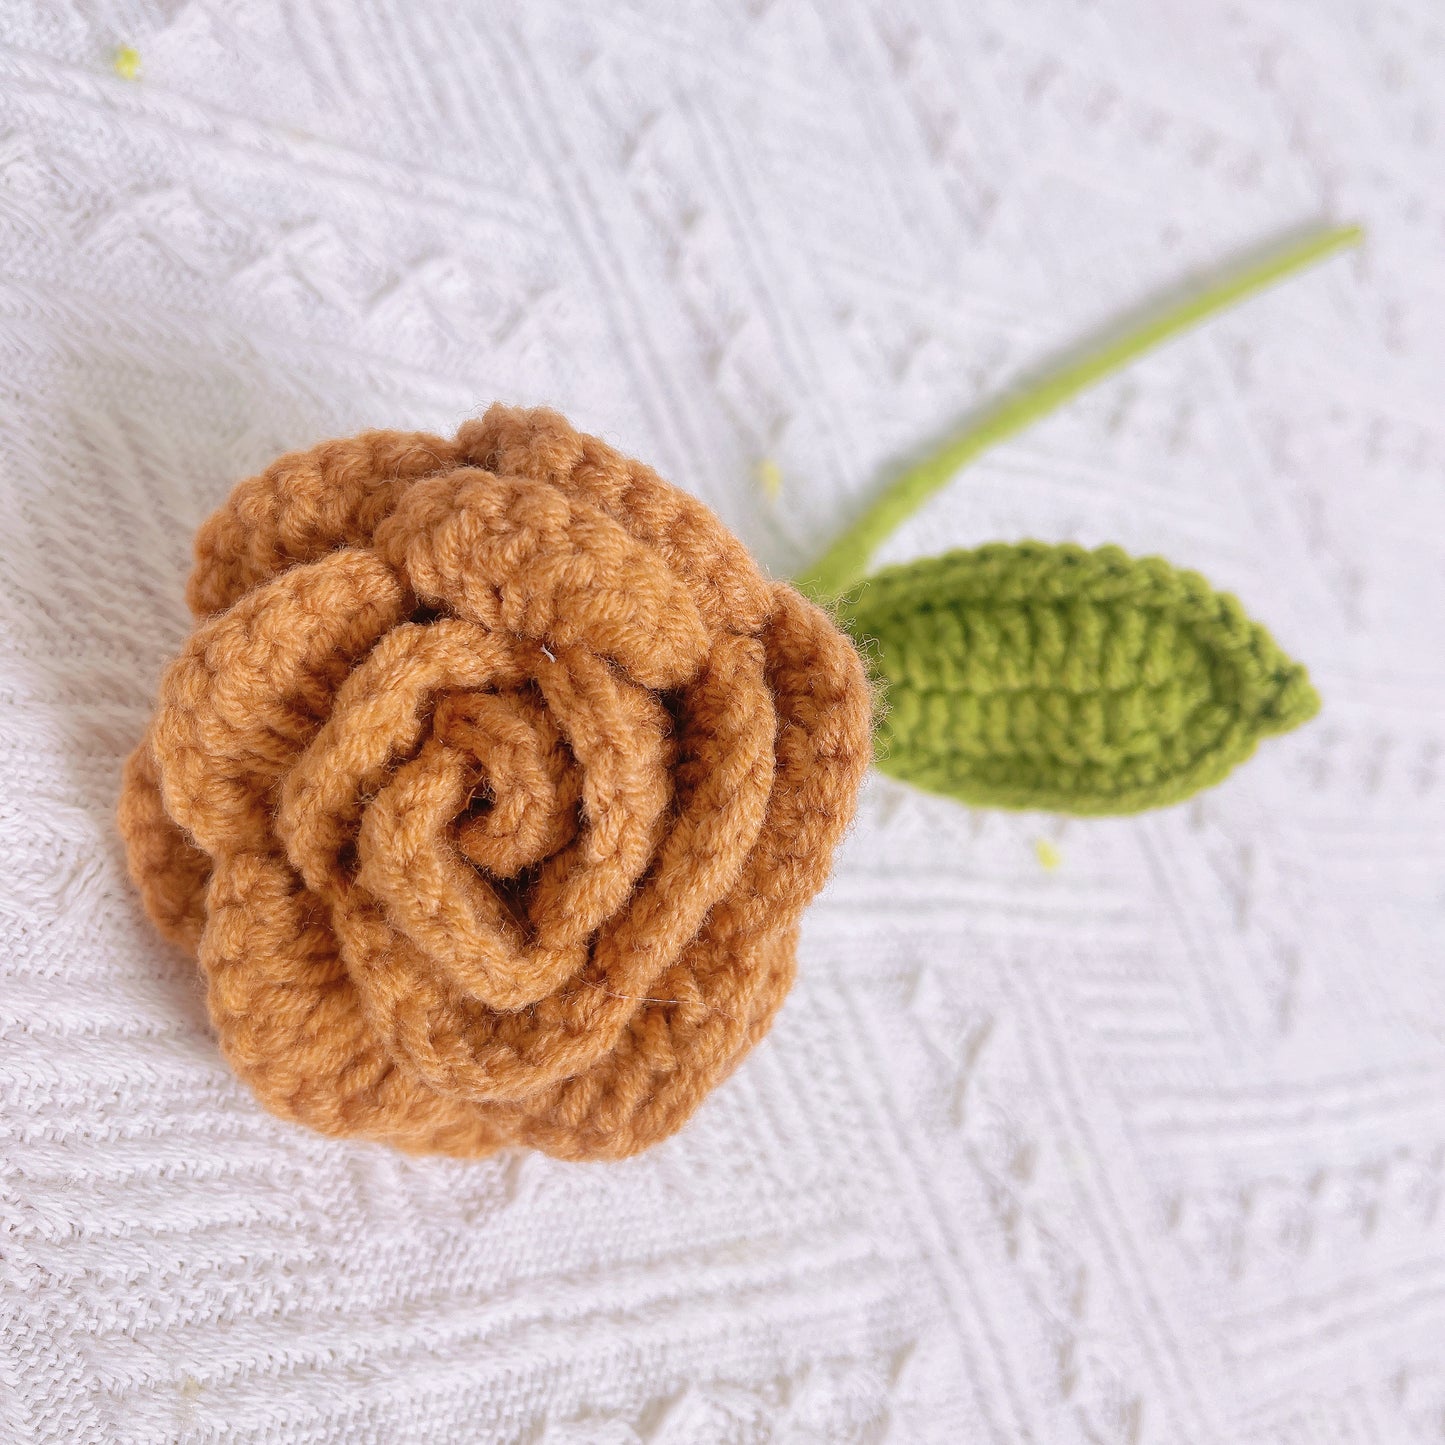 Handmade Crochet Everted Roses - Yarn Crafted, Home Decor, Gift Idea, Romantic and Charming, Symbolic Flower, Imitation Flower, Valentine's